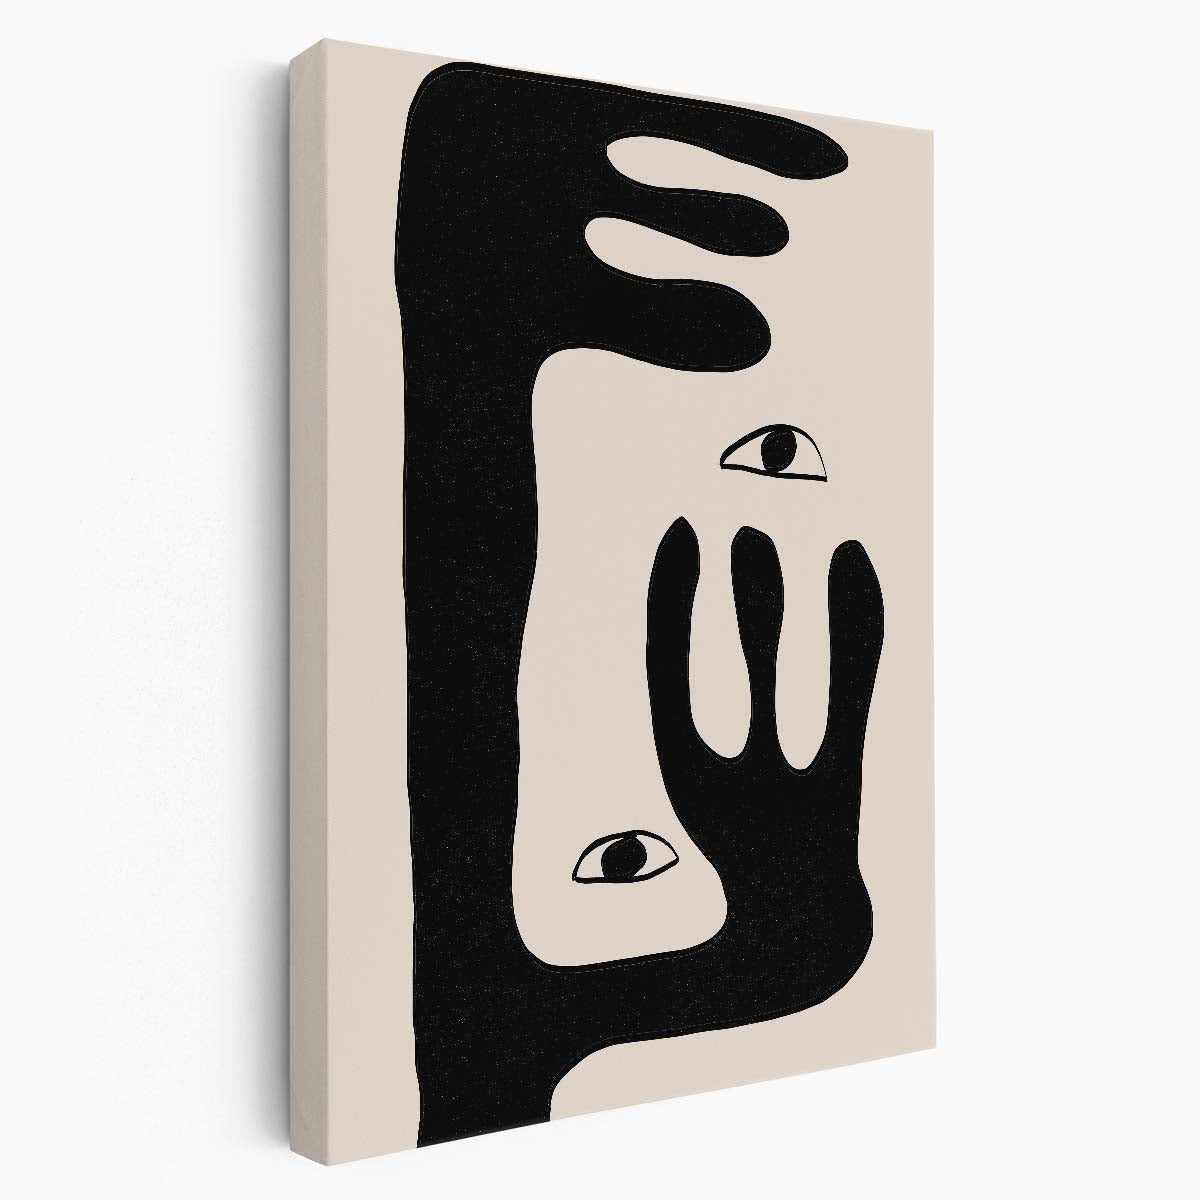 Abstract Eye & Hand Illustration, Beige Wall Art by MIUUS STUDIO by Luxuriance Designs, made in USA